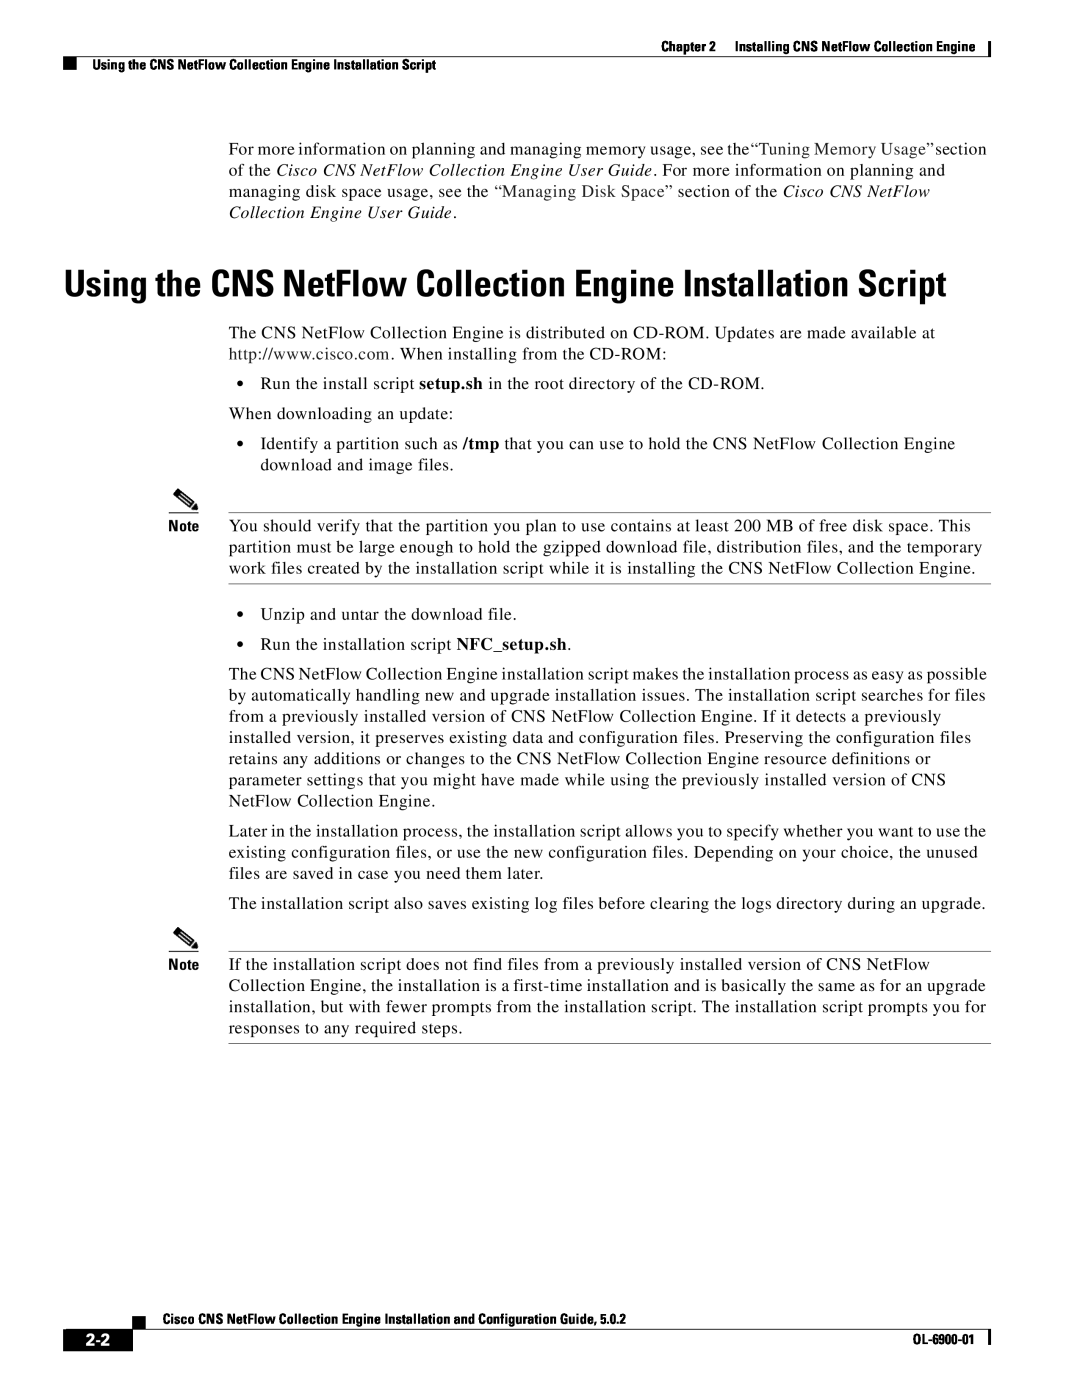 Cisco Systems OL-6900-01 manual Using the CNS NetFlow Collection Engine Installation Script 